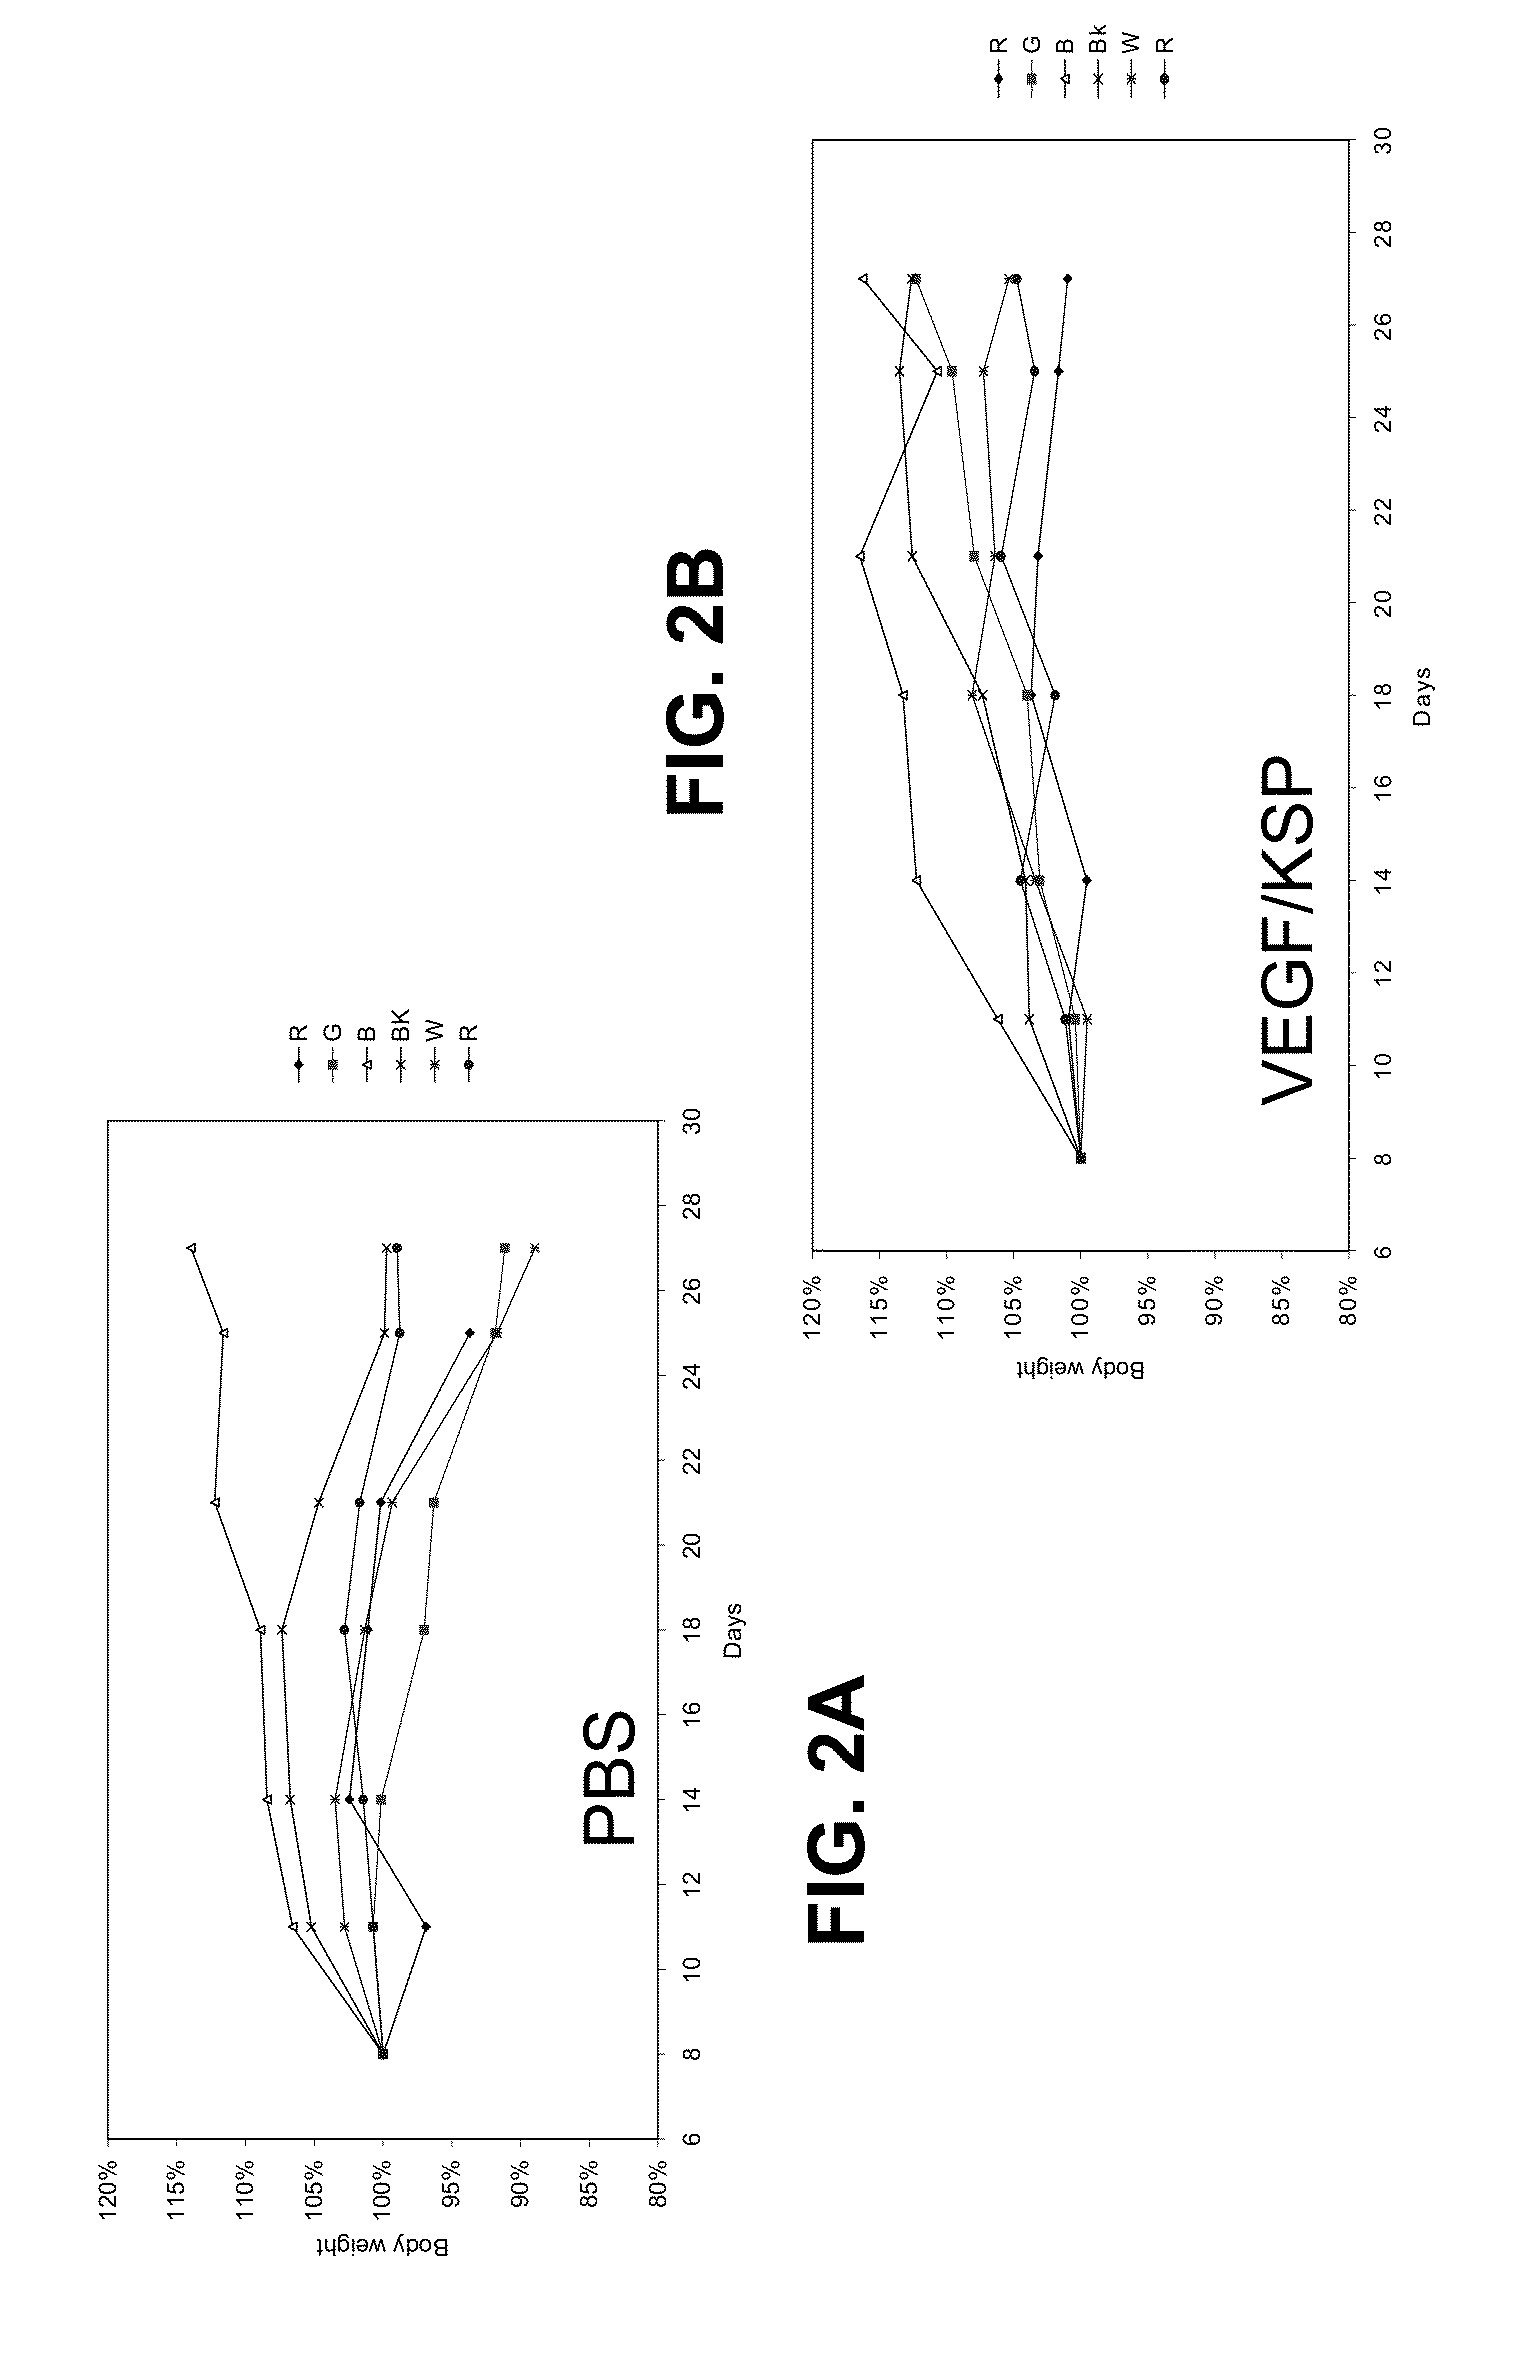 COMPOSITIONS AND METHODS FOR INHIBITING EXPRESSION OF Eg5 AND VEGF GENES